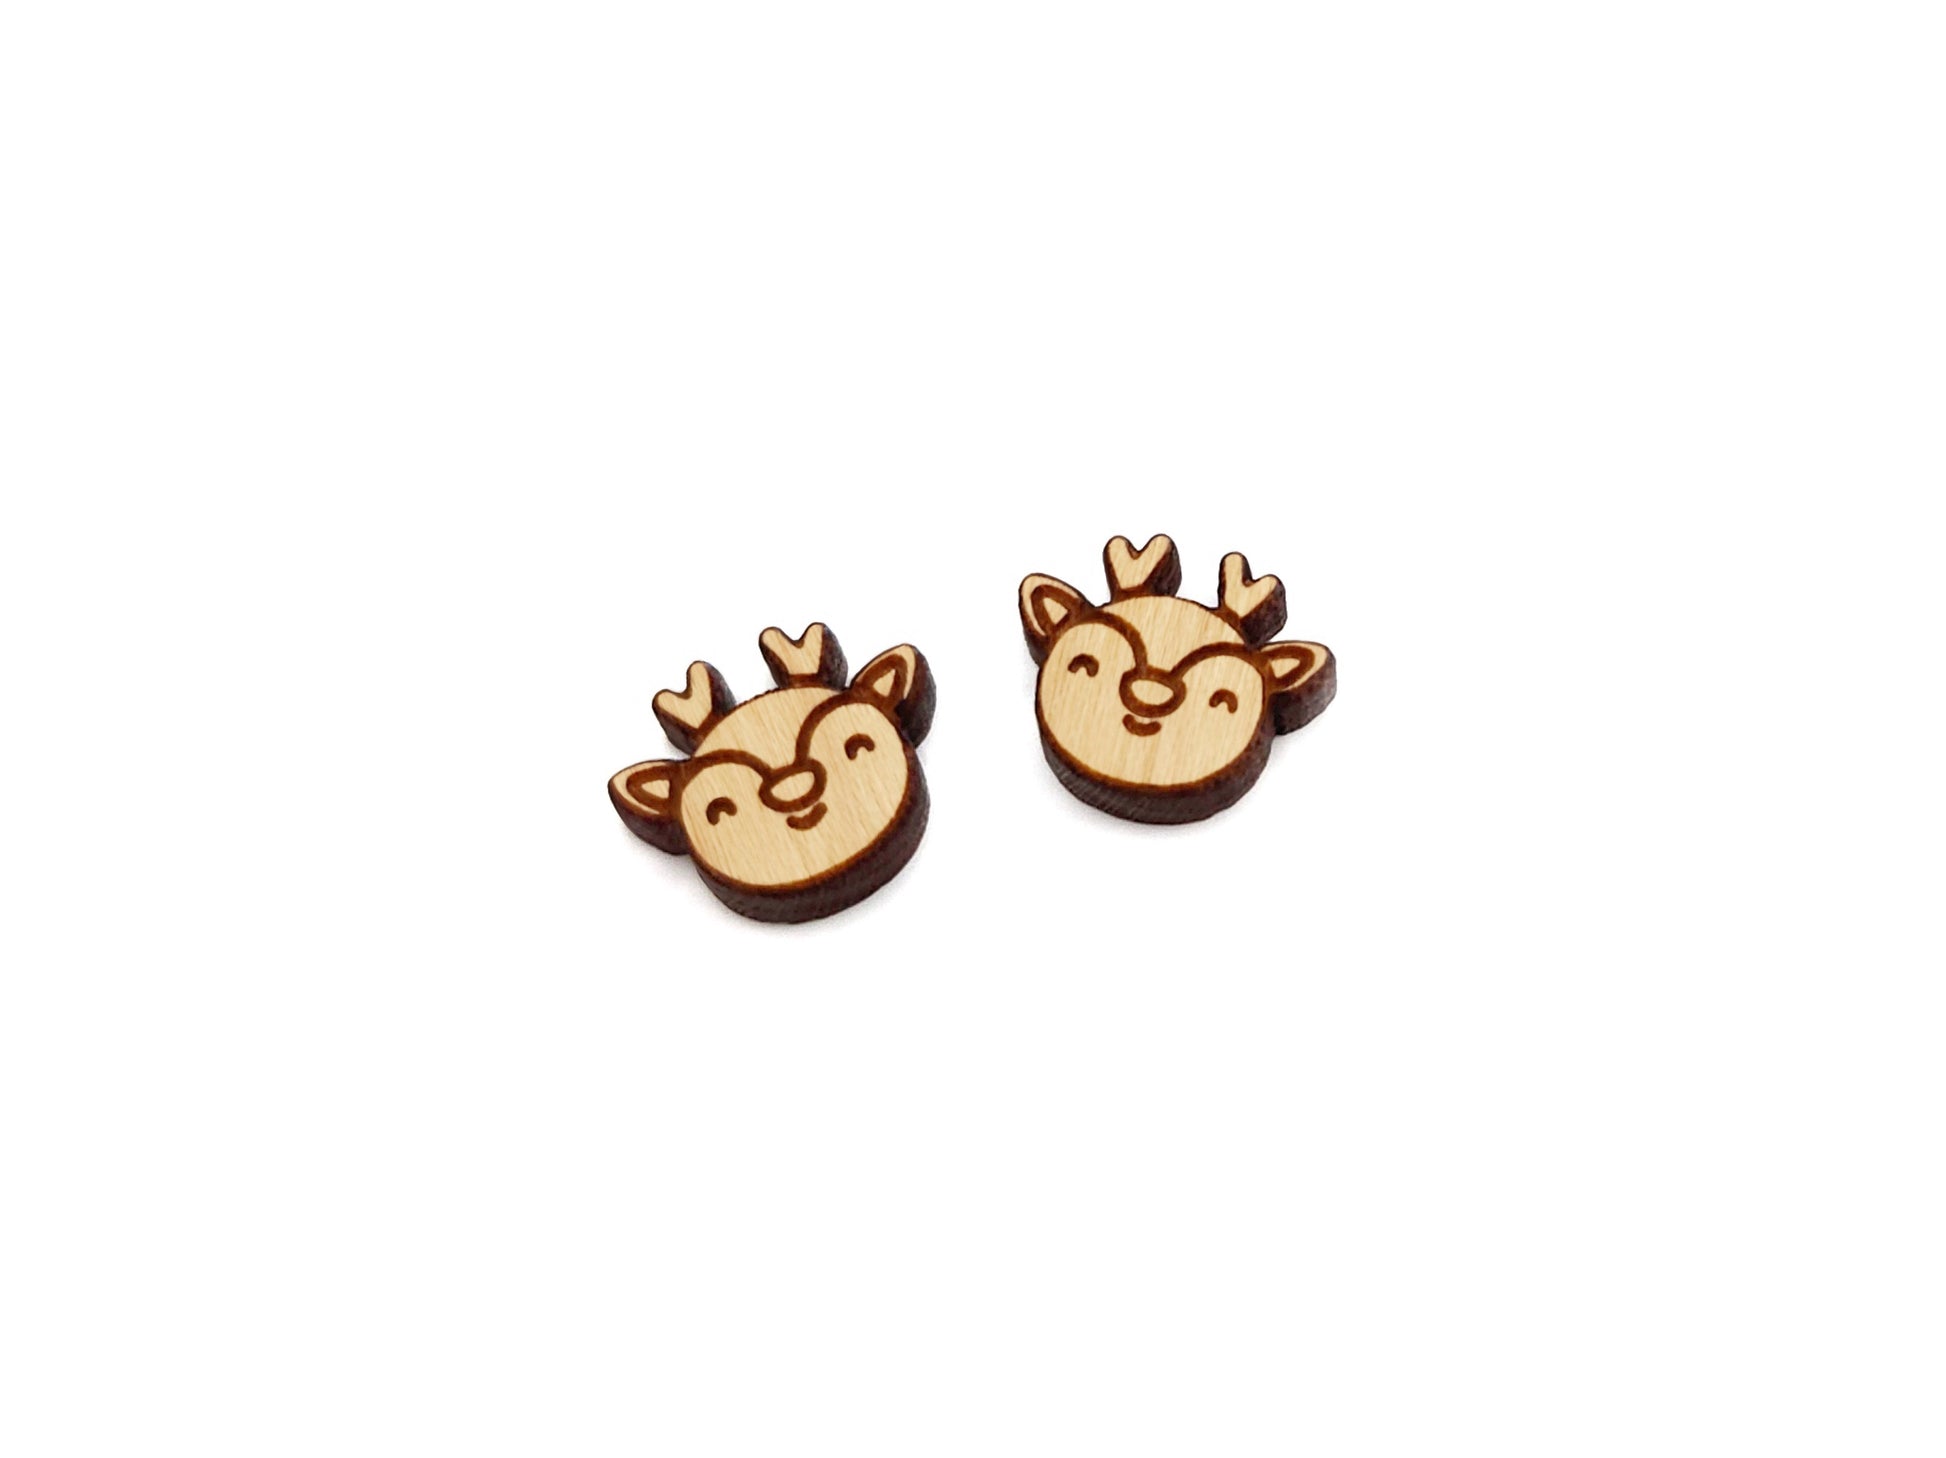 a pair of wooden cabochon stud earring blanks cut and engraved to look like a reindeer